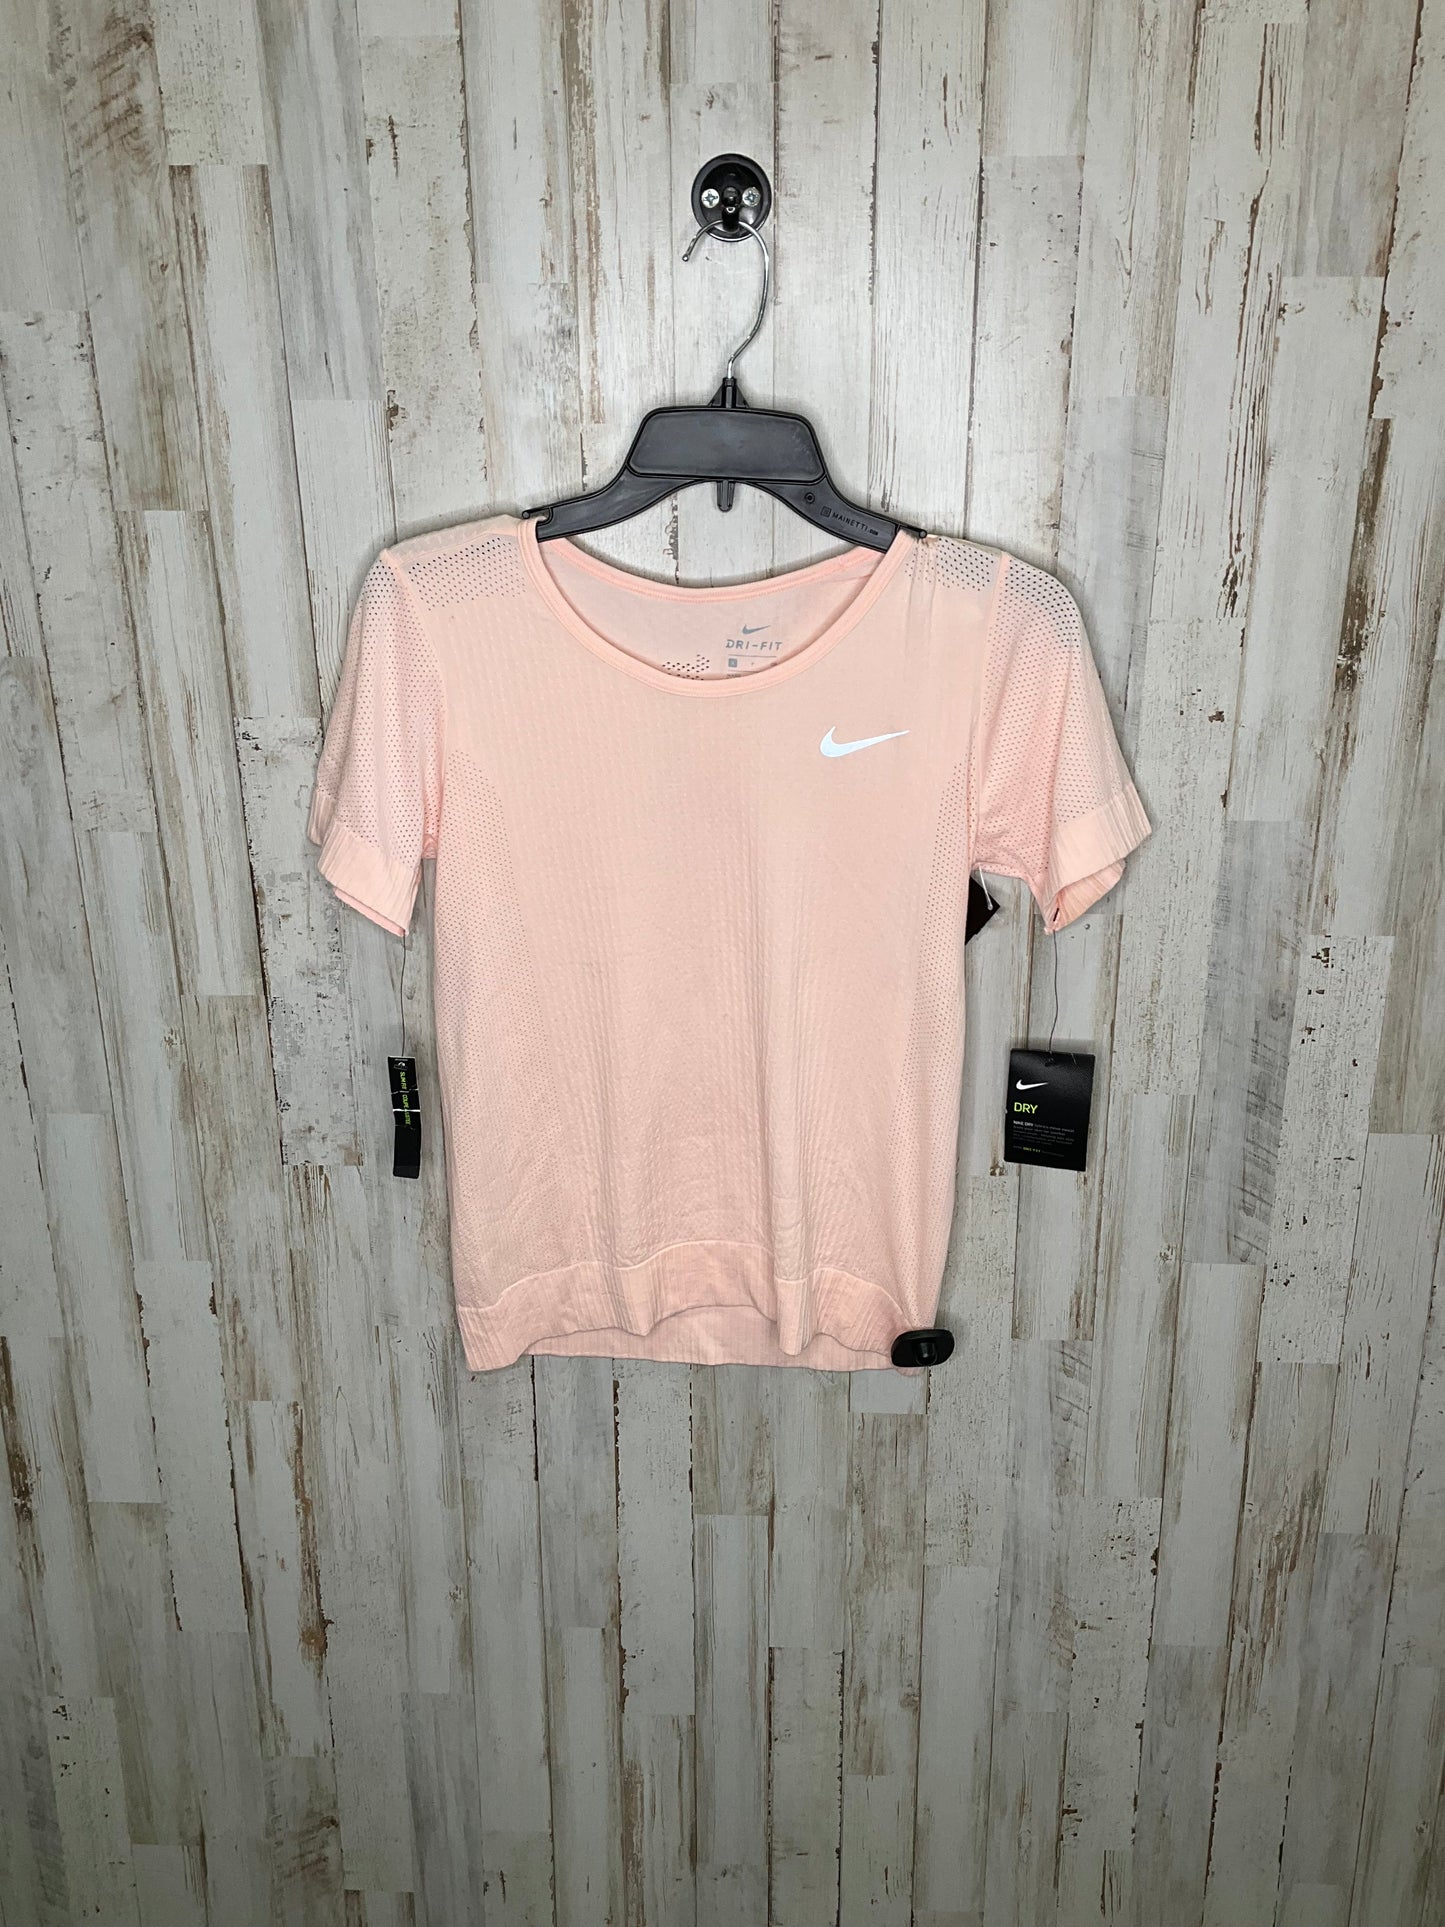 Peach Athletic Top Short Sleeve Nike, Size S